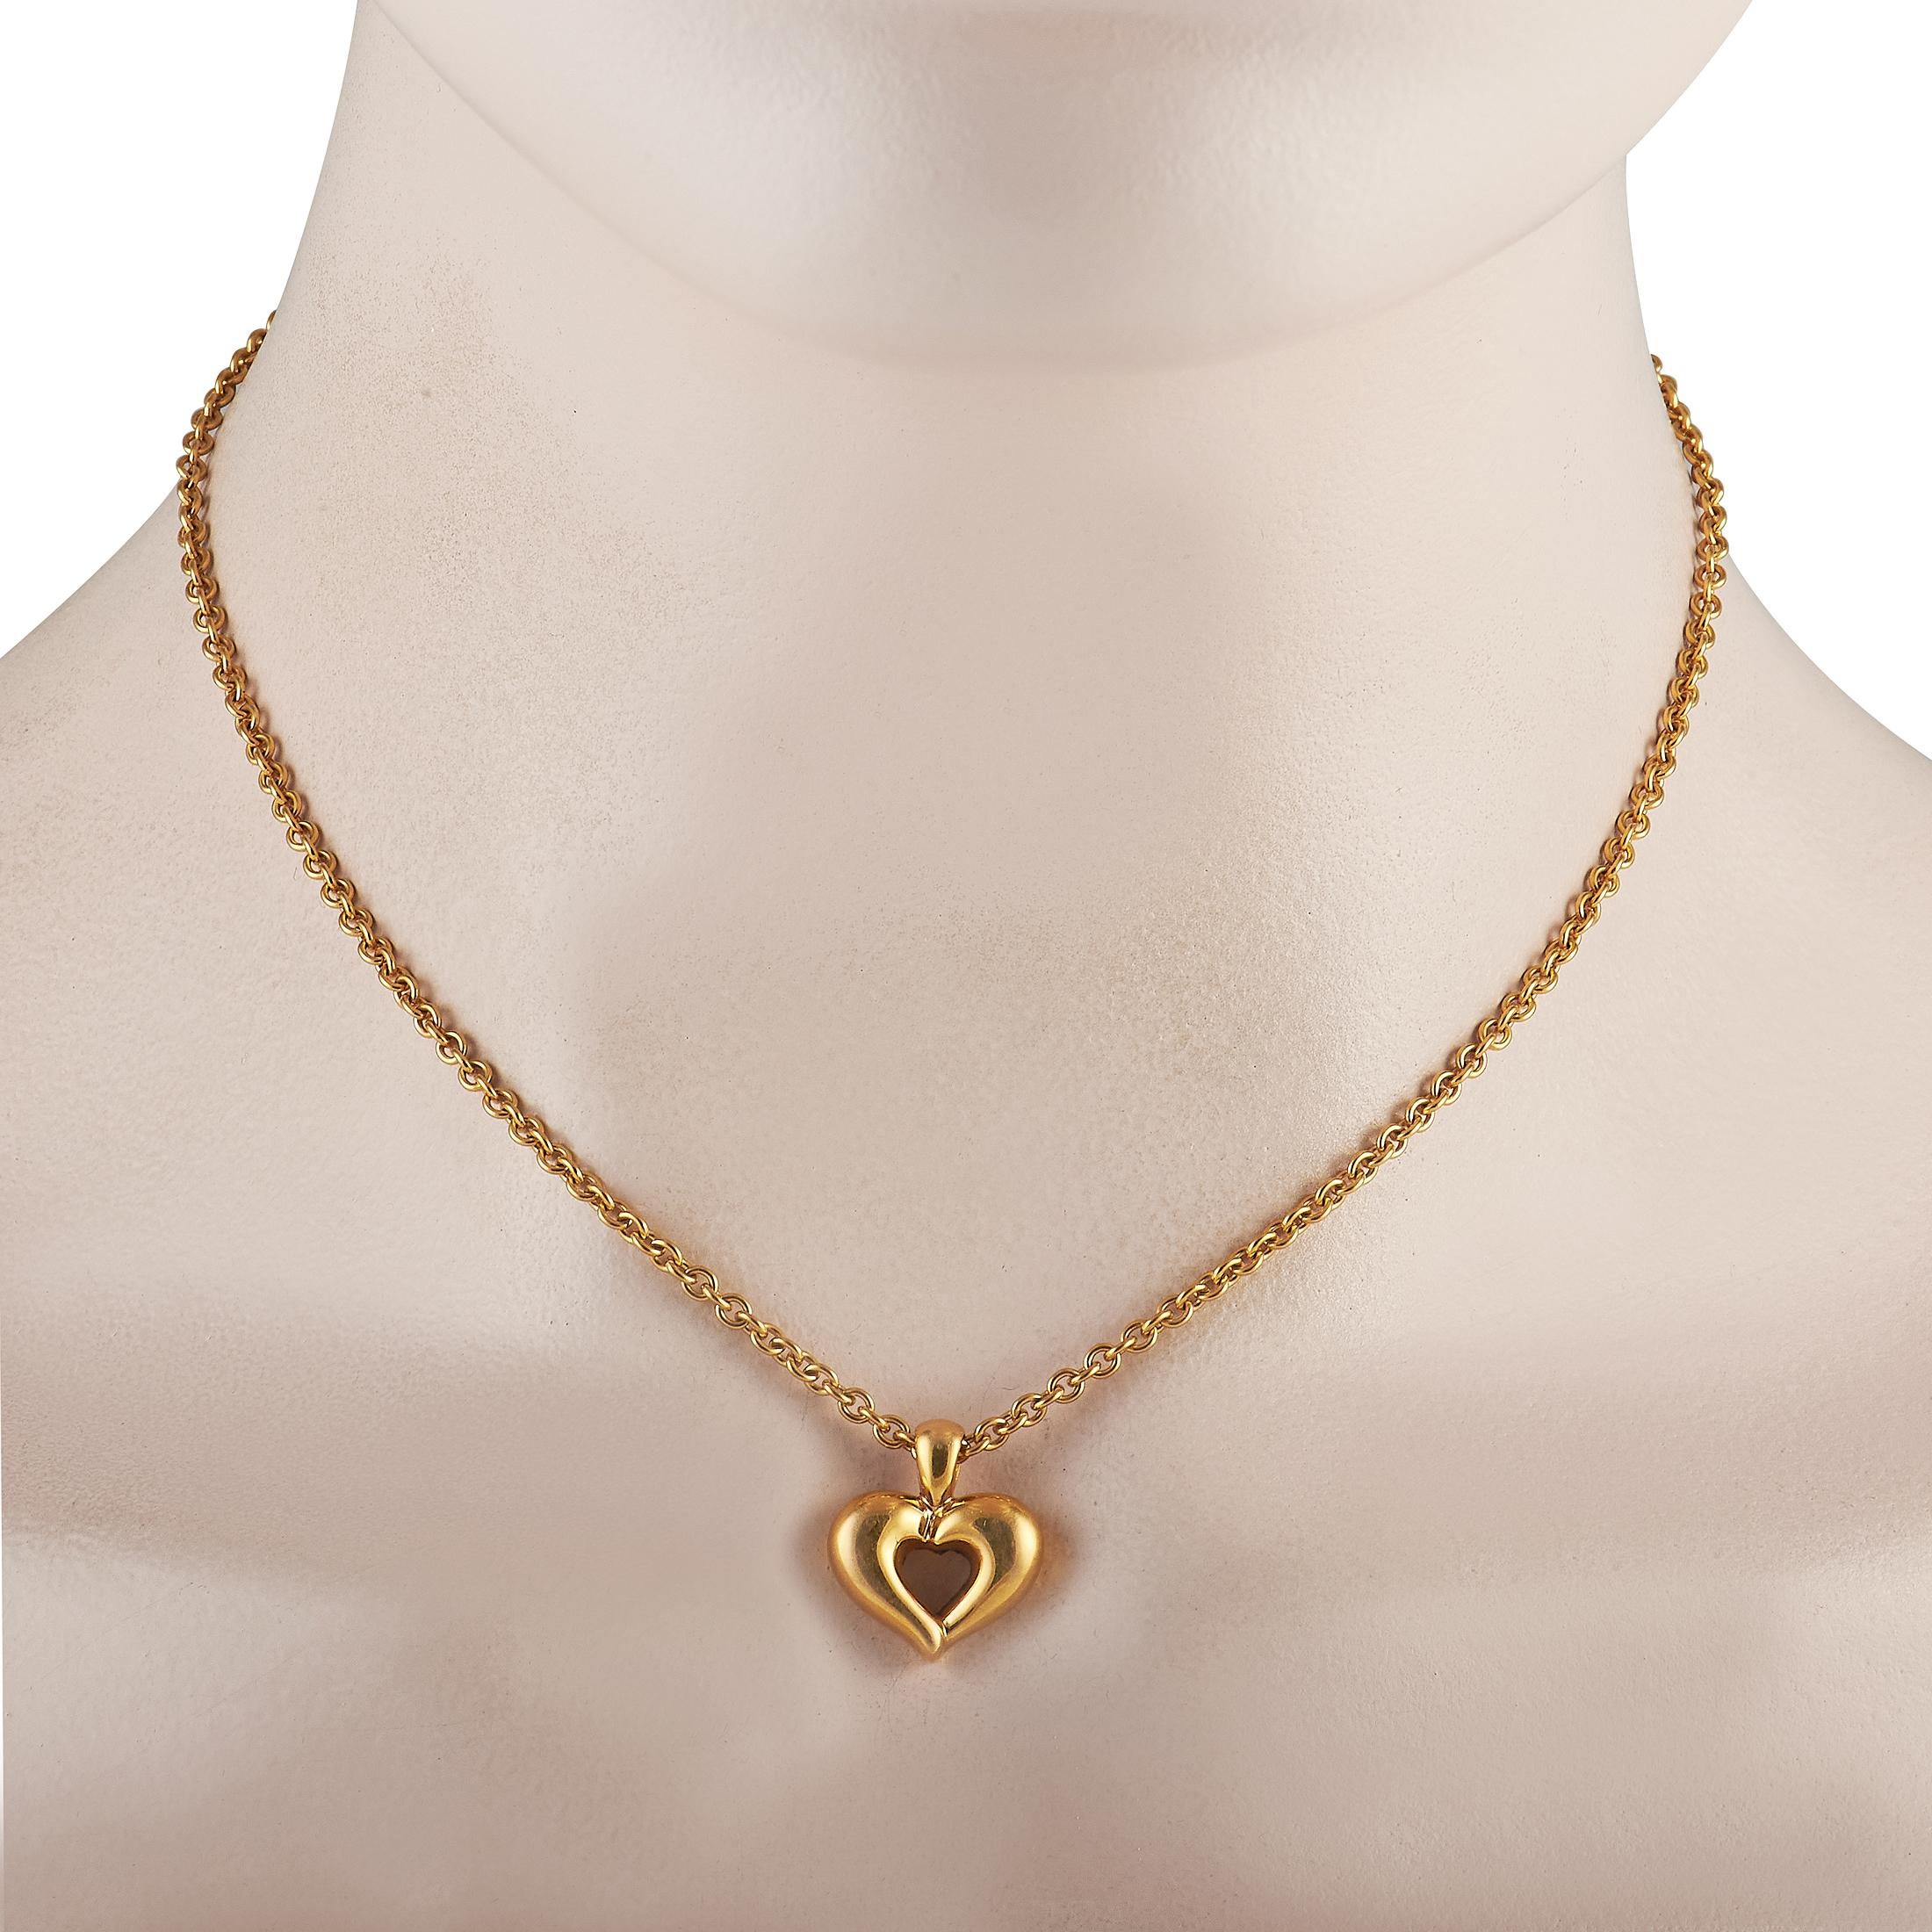 This exquisite Van Cleef & Arpels necklace is simple, elegant, and ideal for any occasion. A heart-shaped pendant measuring 0.75” long and 0.65” wide makes a statement at the center of a 16” long chain on this opulent piece, which is crafted from